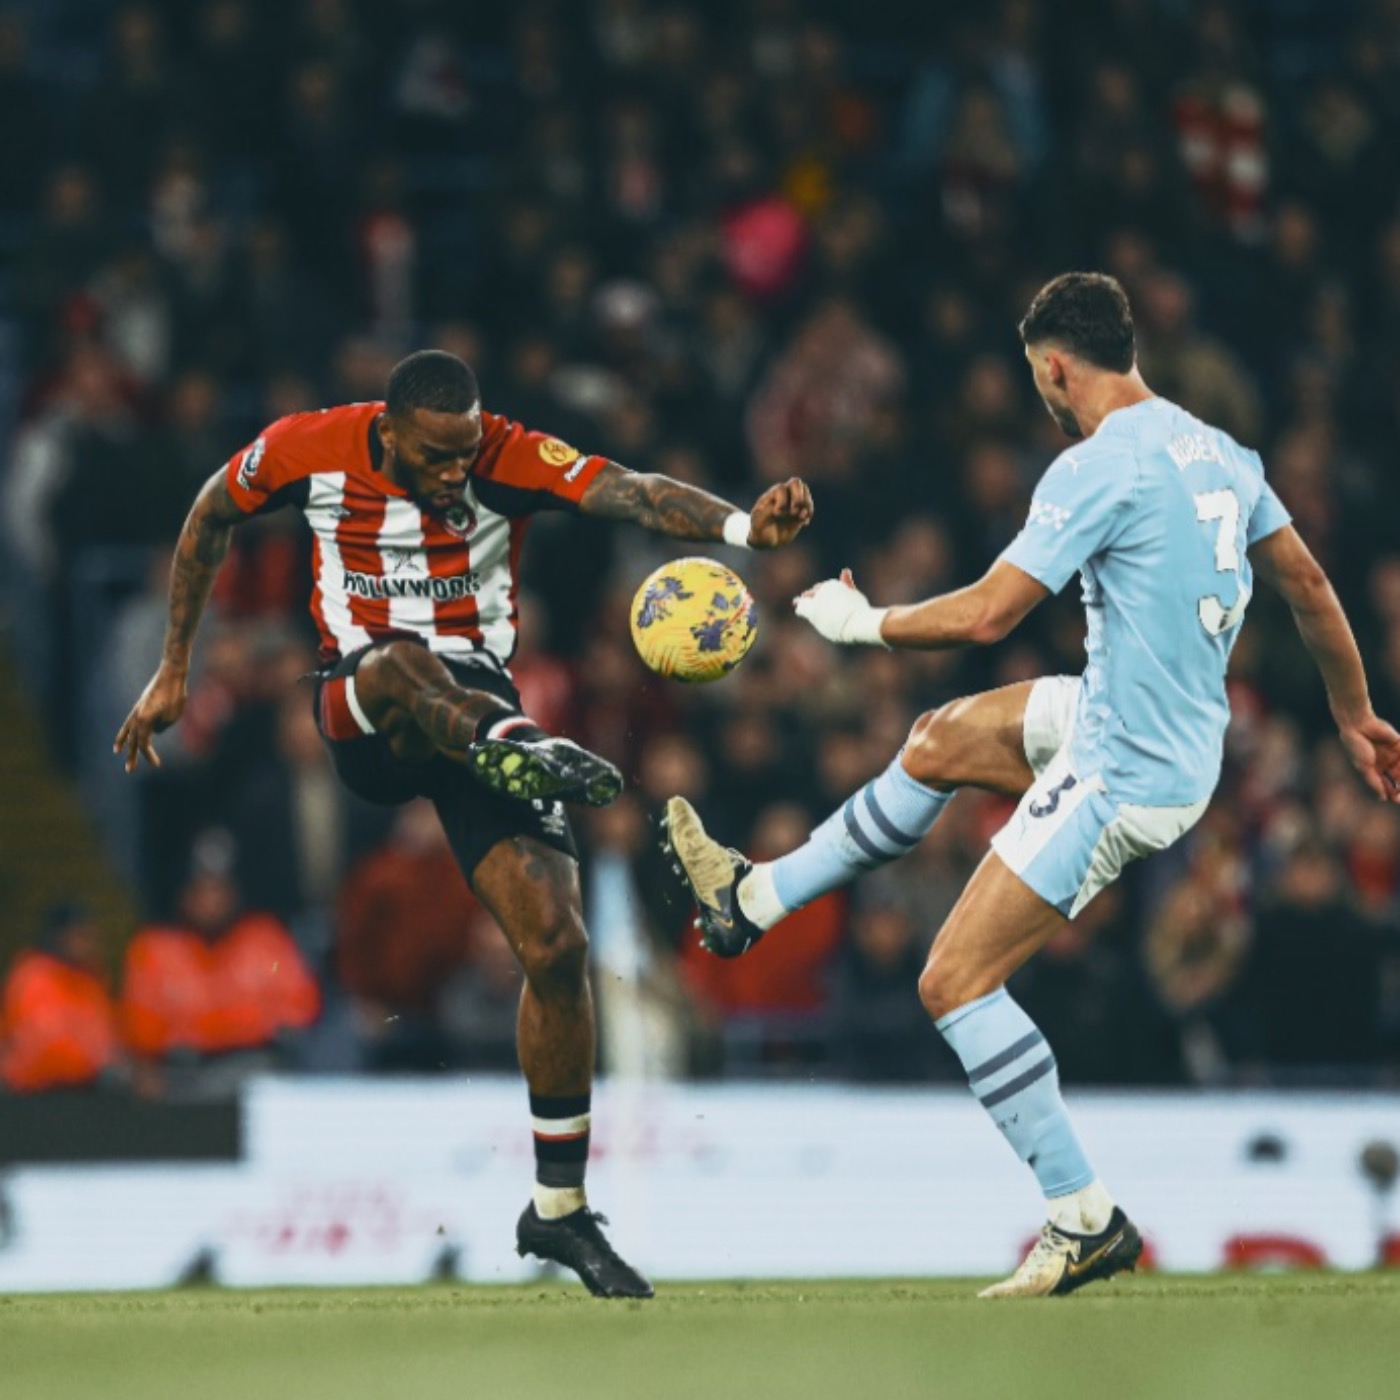 Man City 1 Brentford 0 - Post-Match Podcast From the Stands